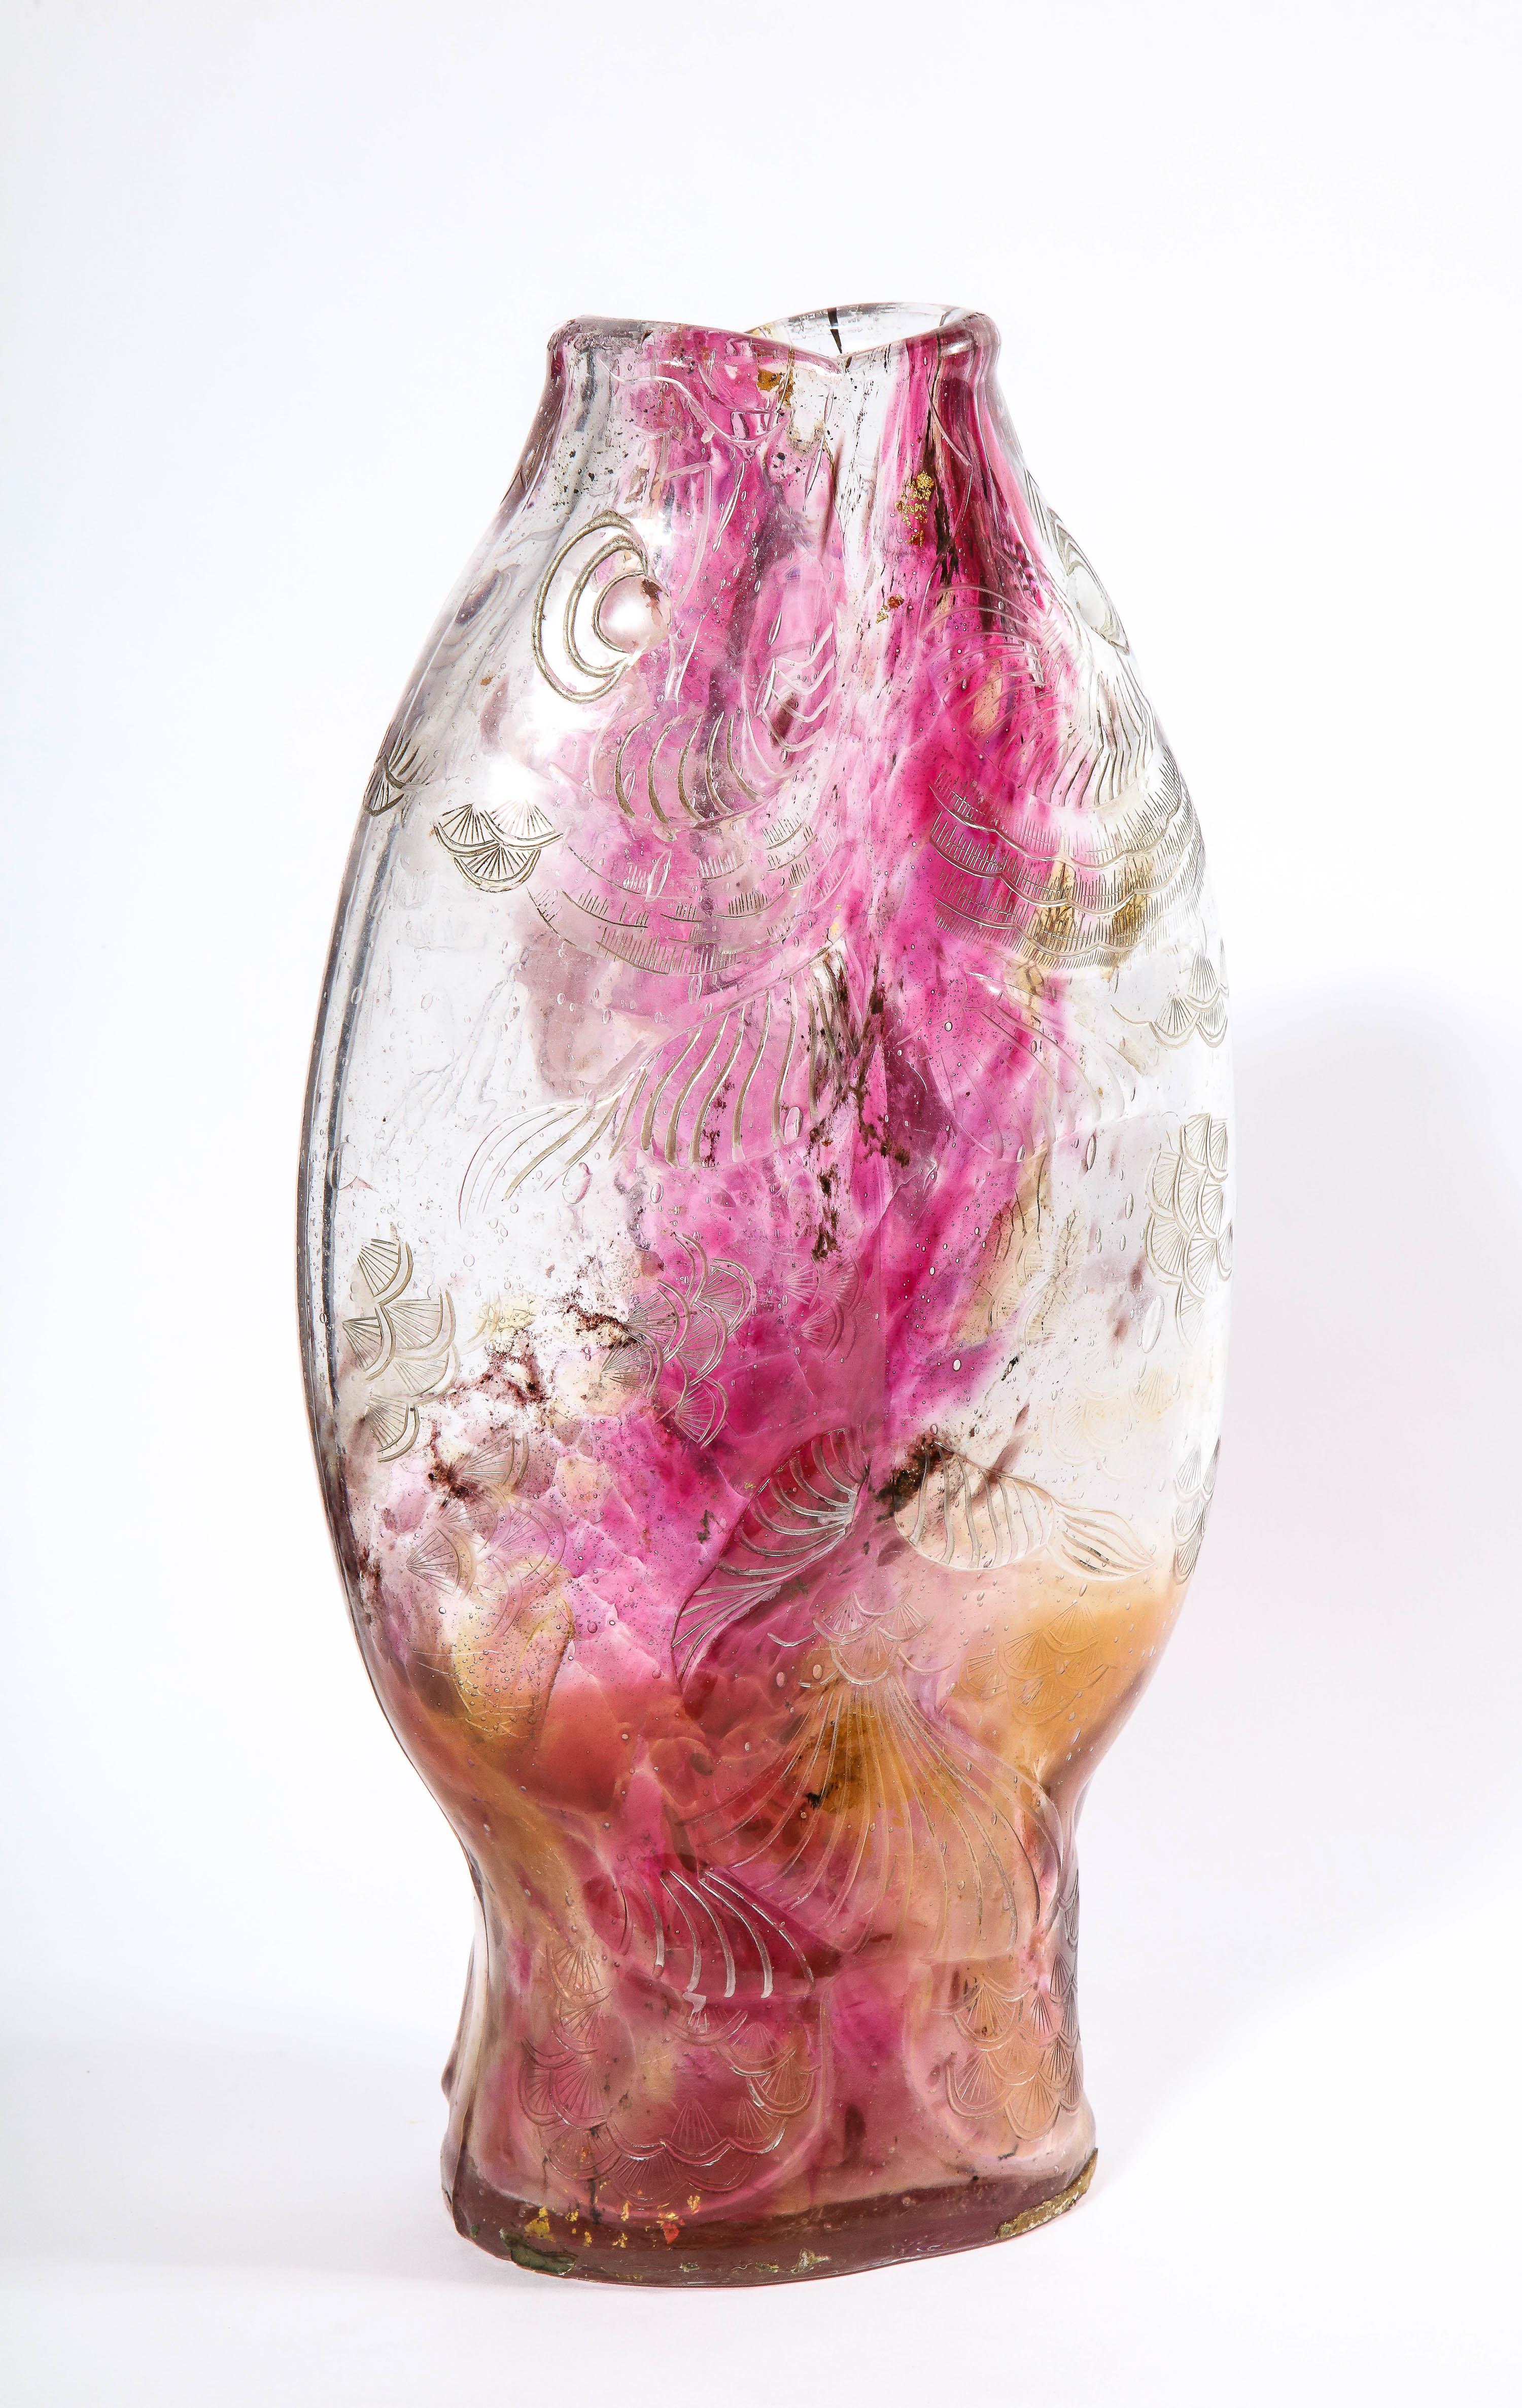 Emile Galle, A Rare & Important Ormolu-Mounted Double Carp Fish Pink-Glass Vase For Sale 8